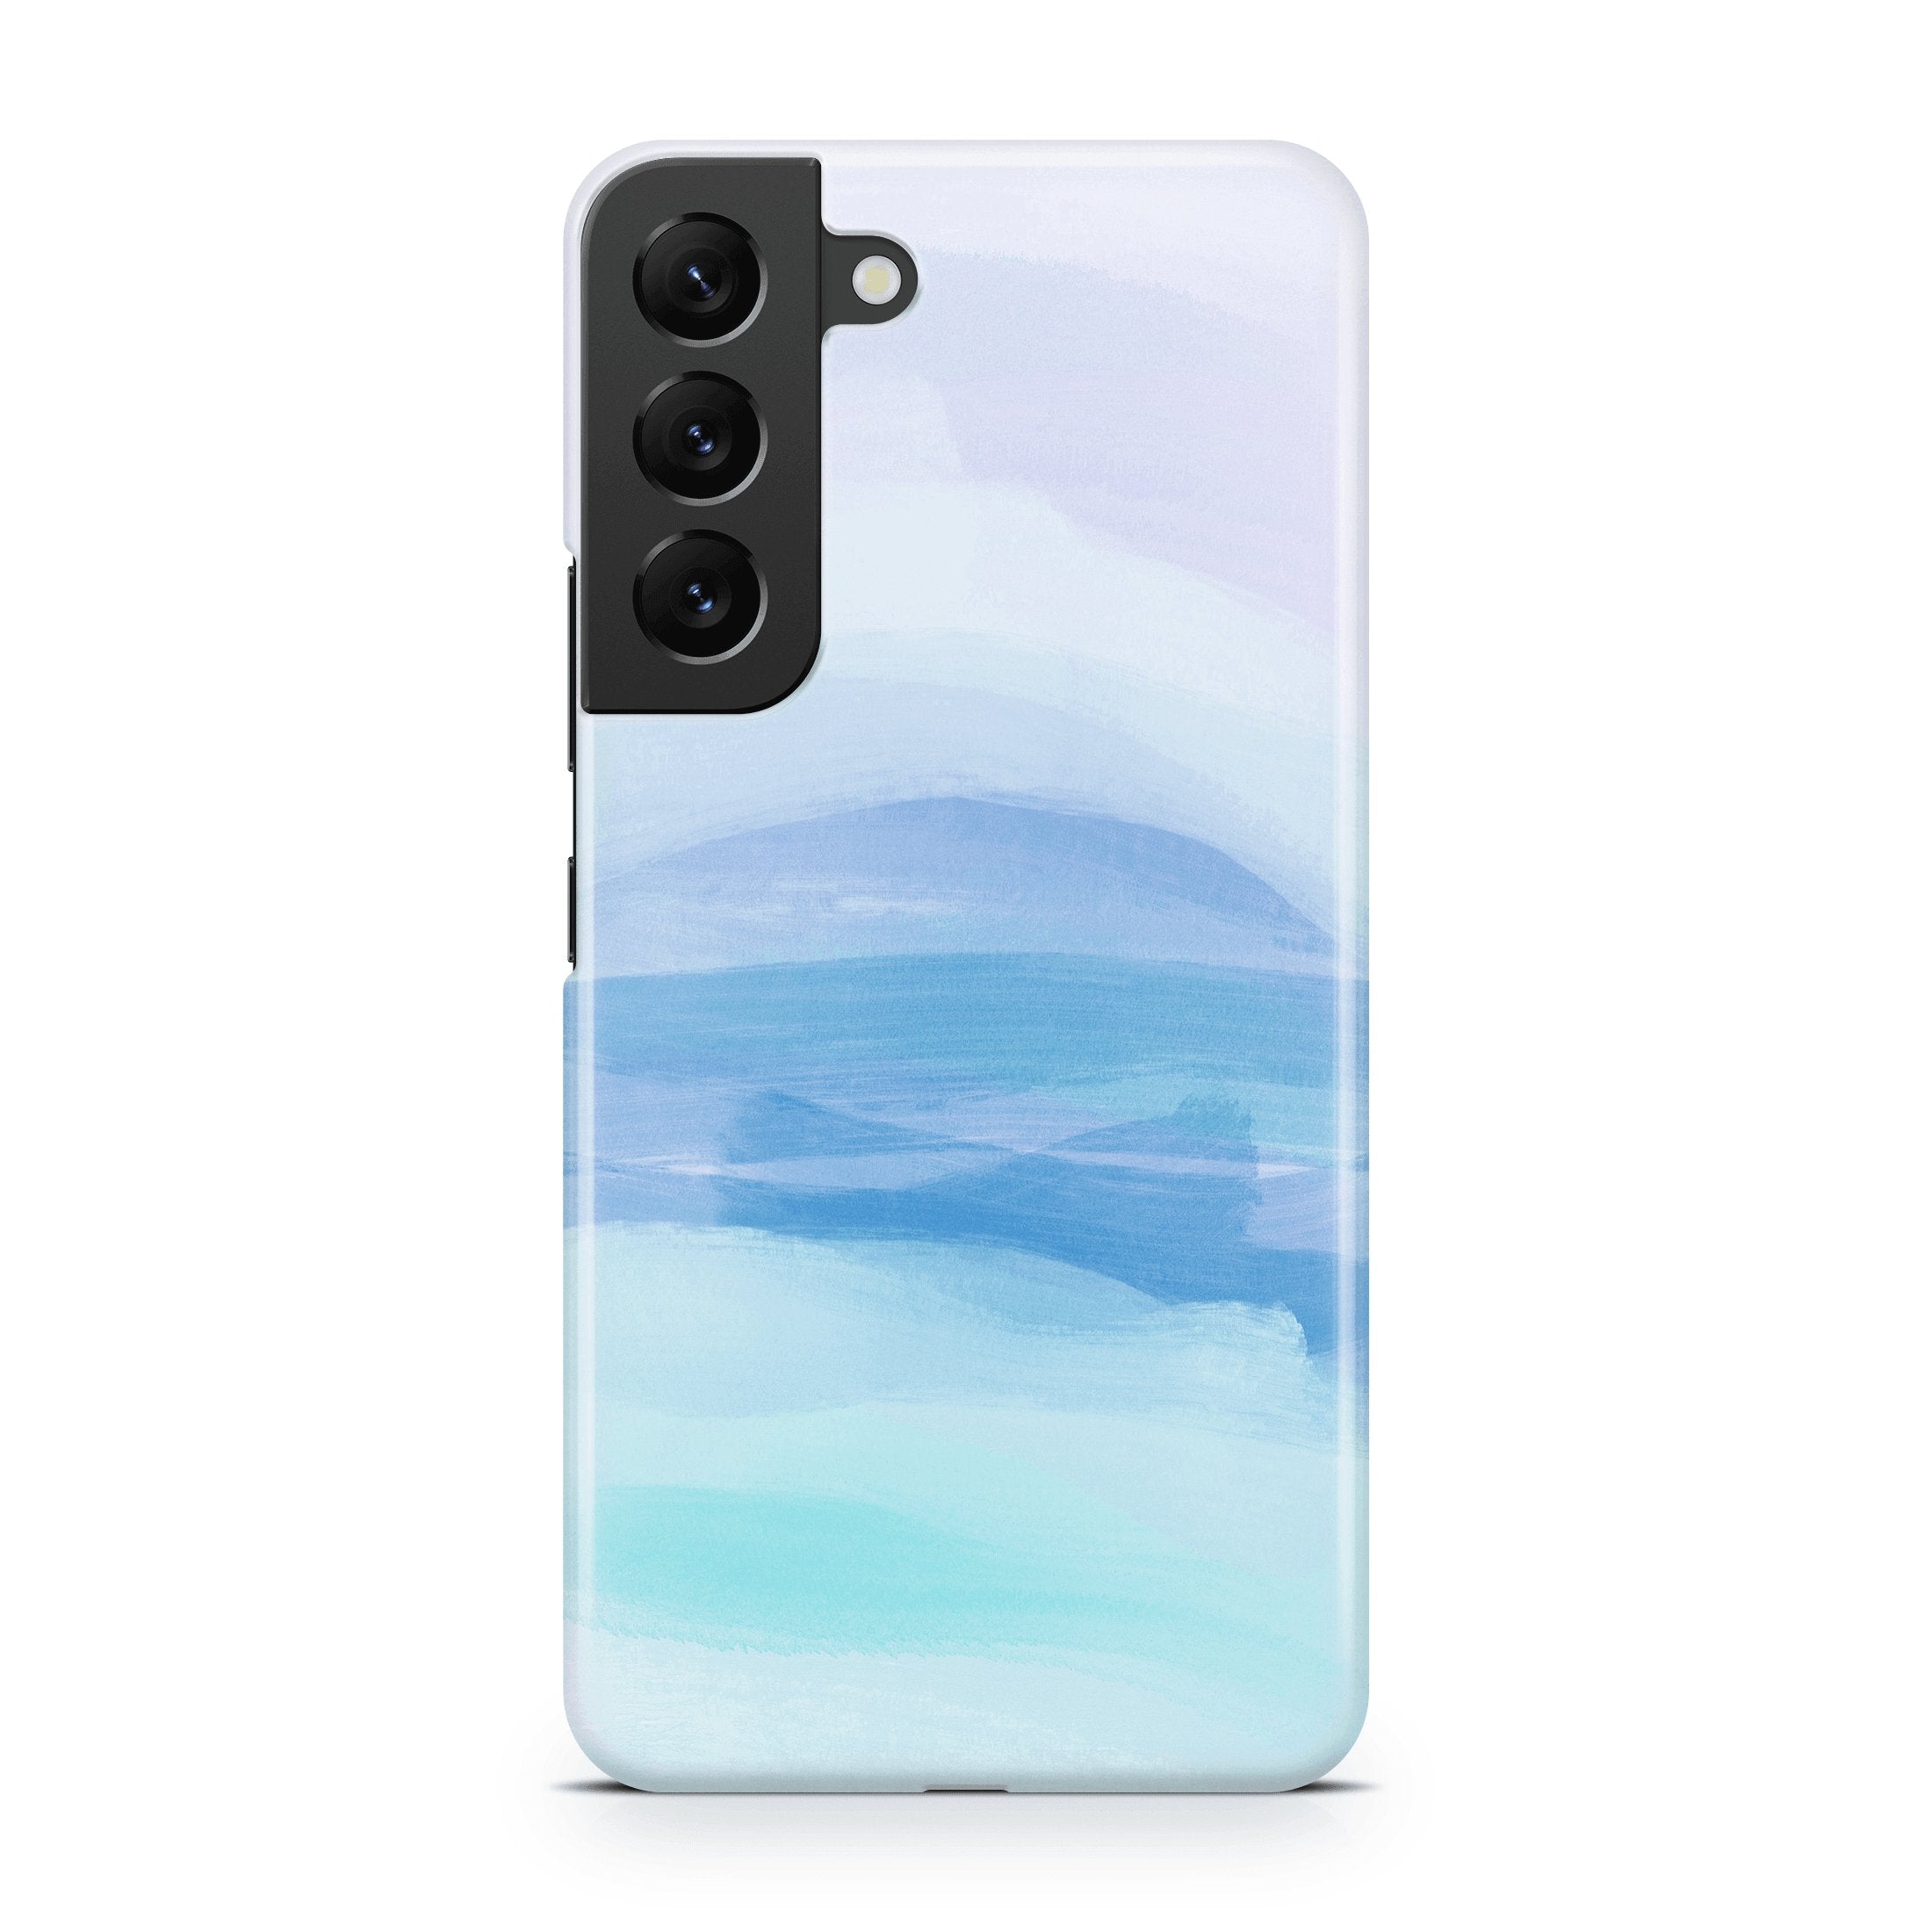 Fading Blue Ombre - Samsung phone case designs by CaseSwagger